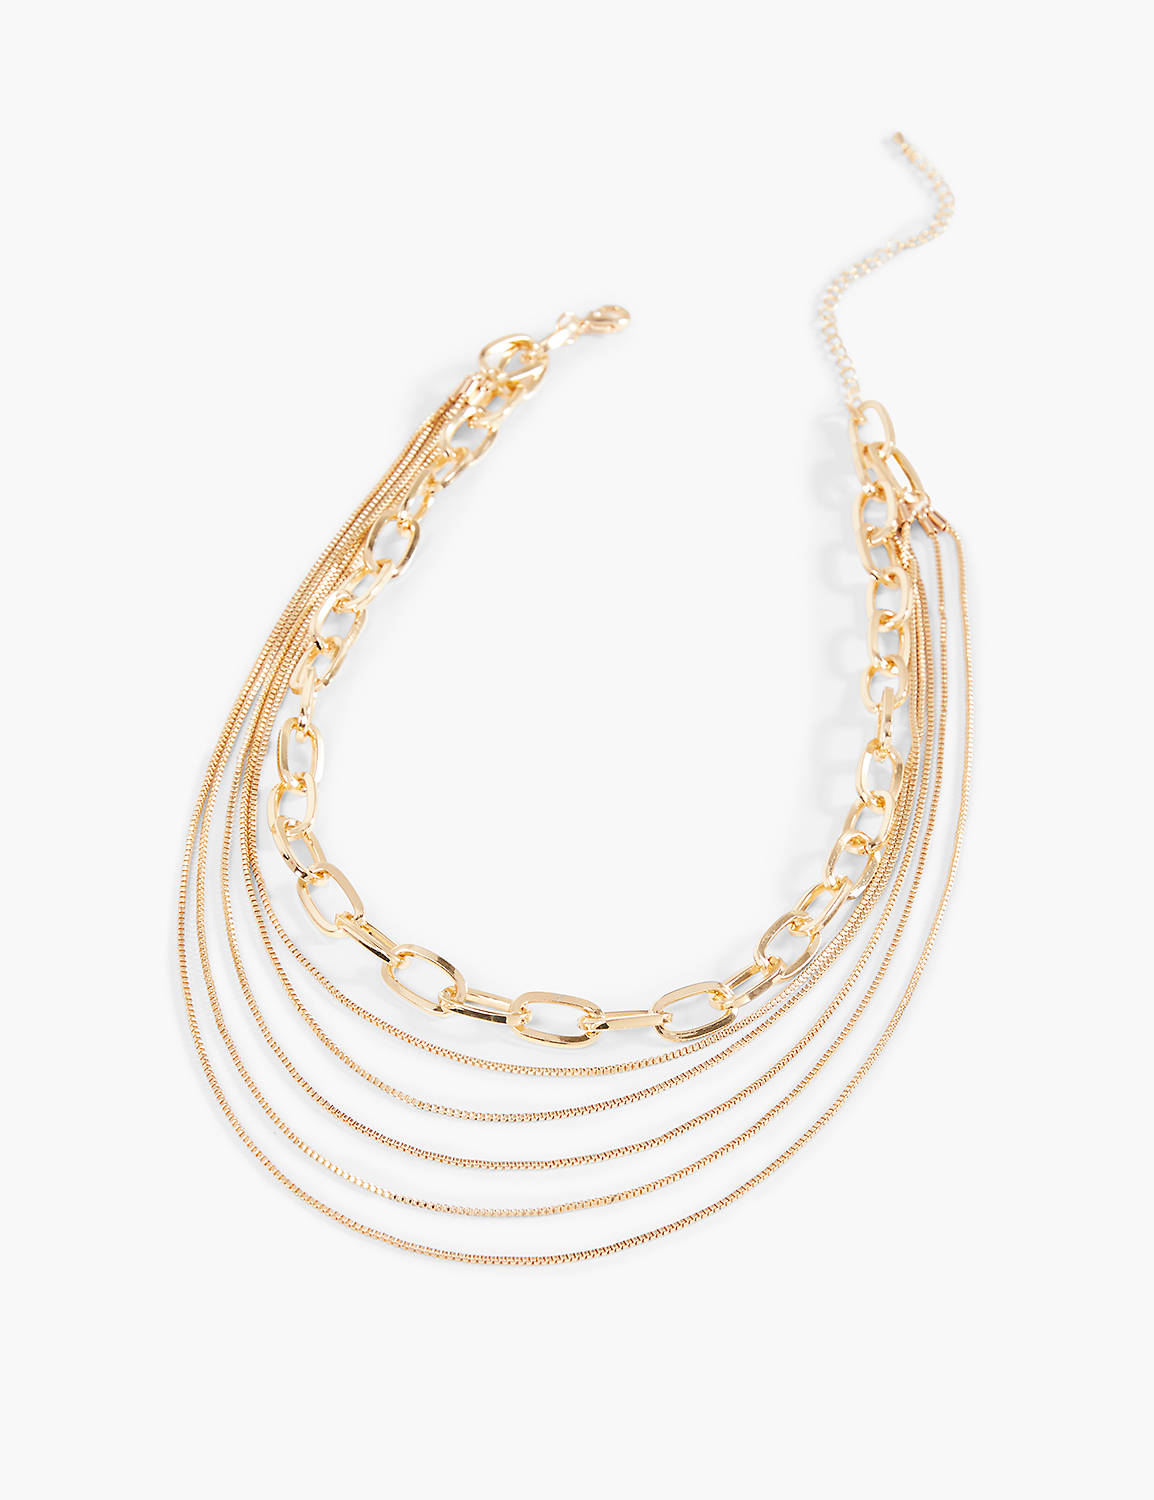 Multi Strand Box Chain With Link Chain Necklace:Gold Tone:ONESZ Product Image 1